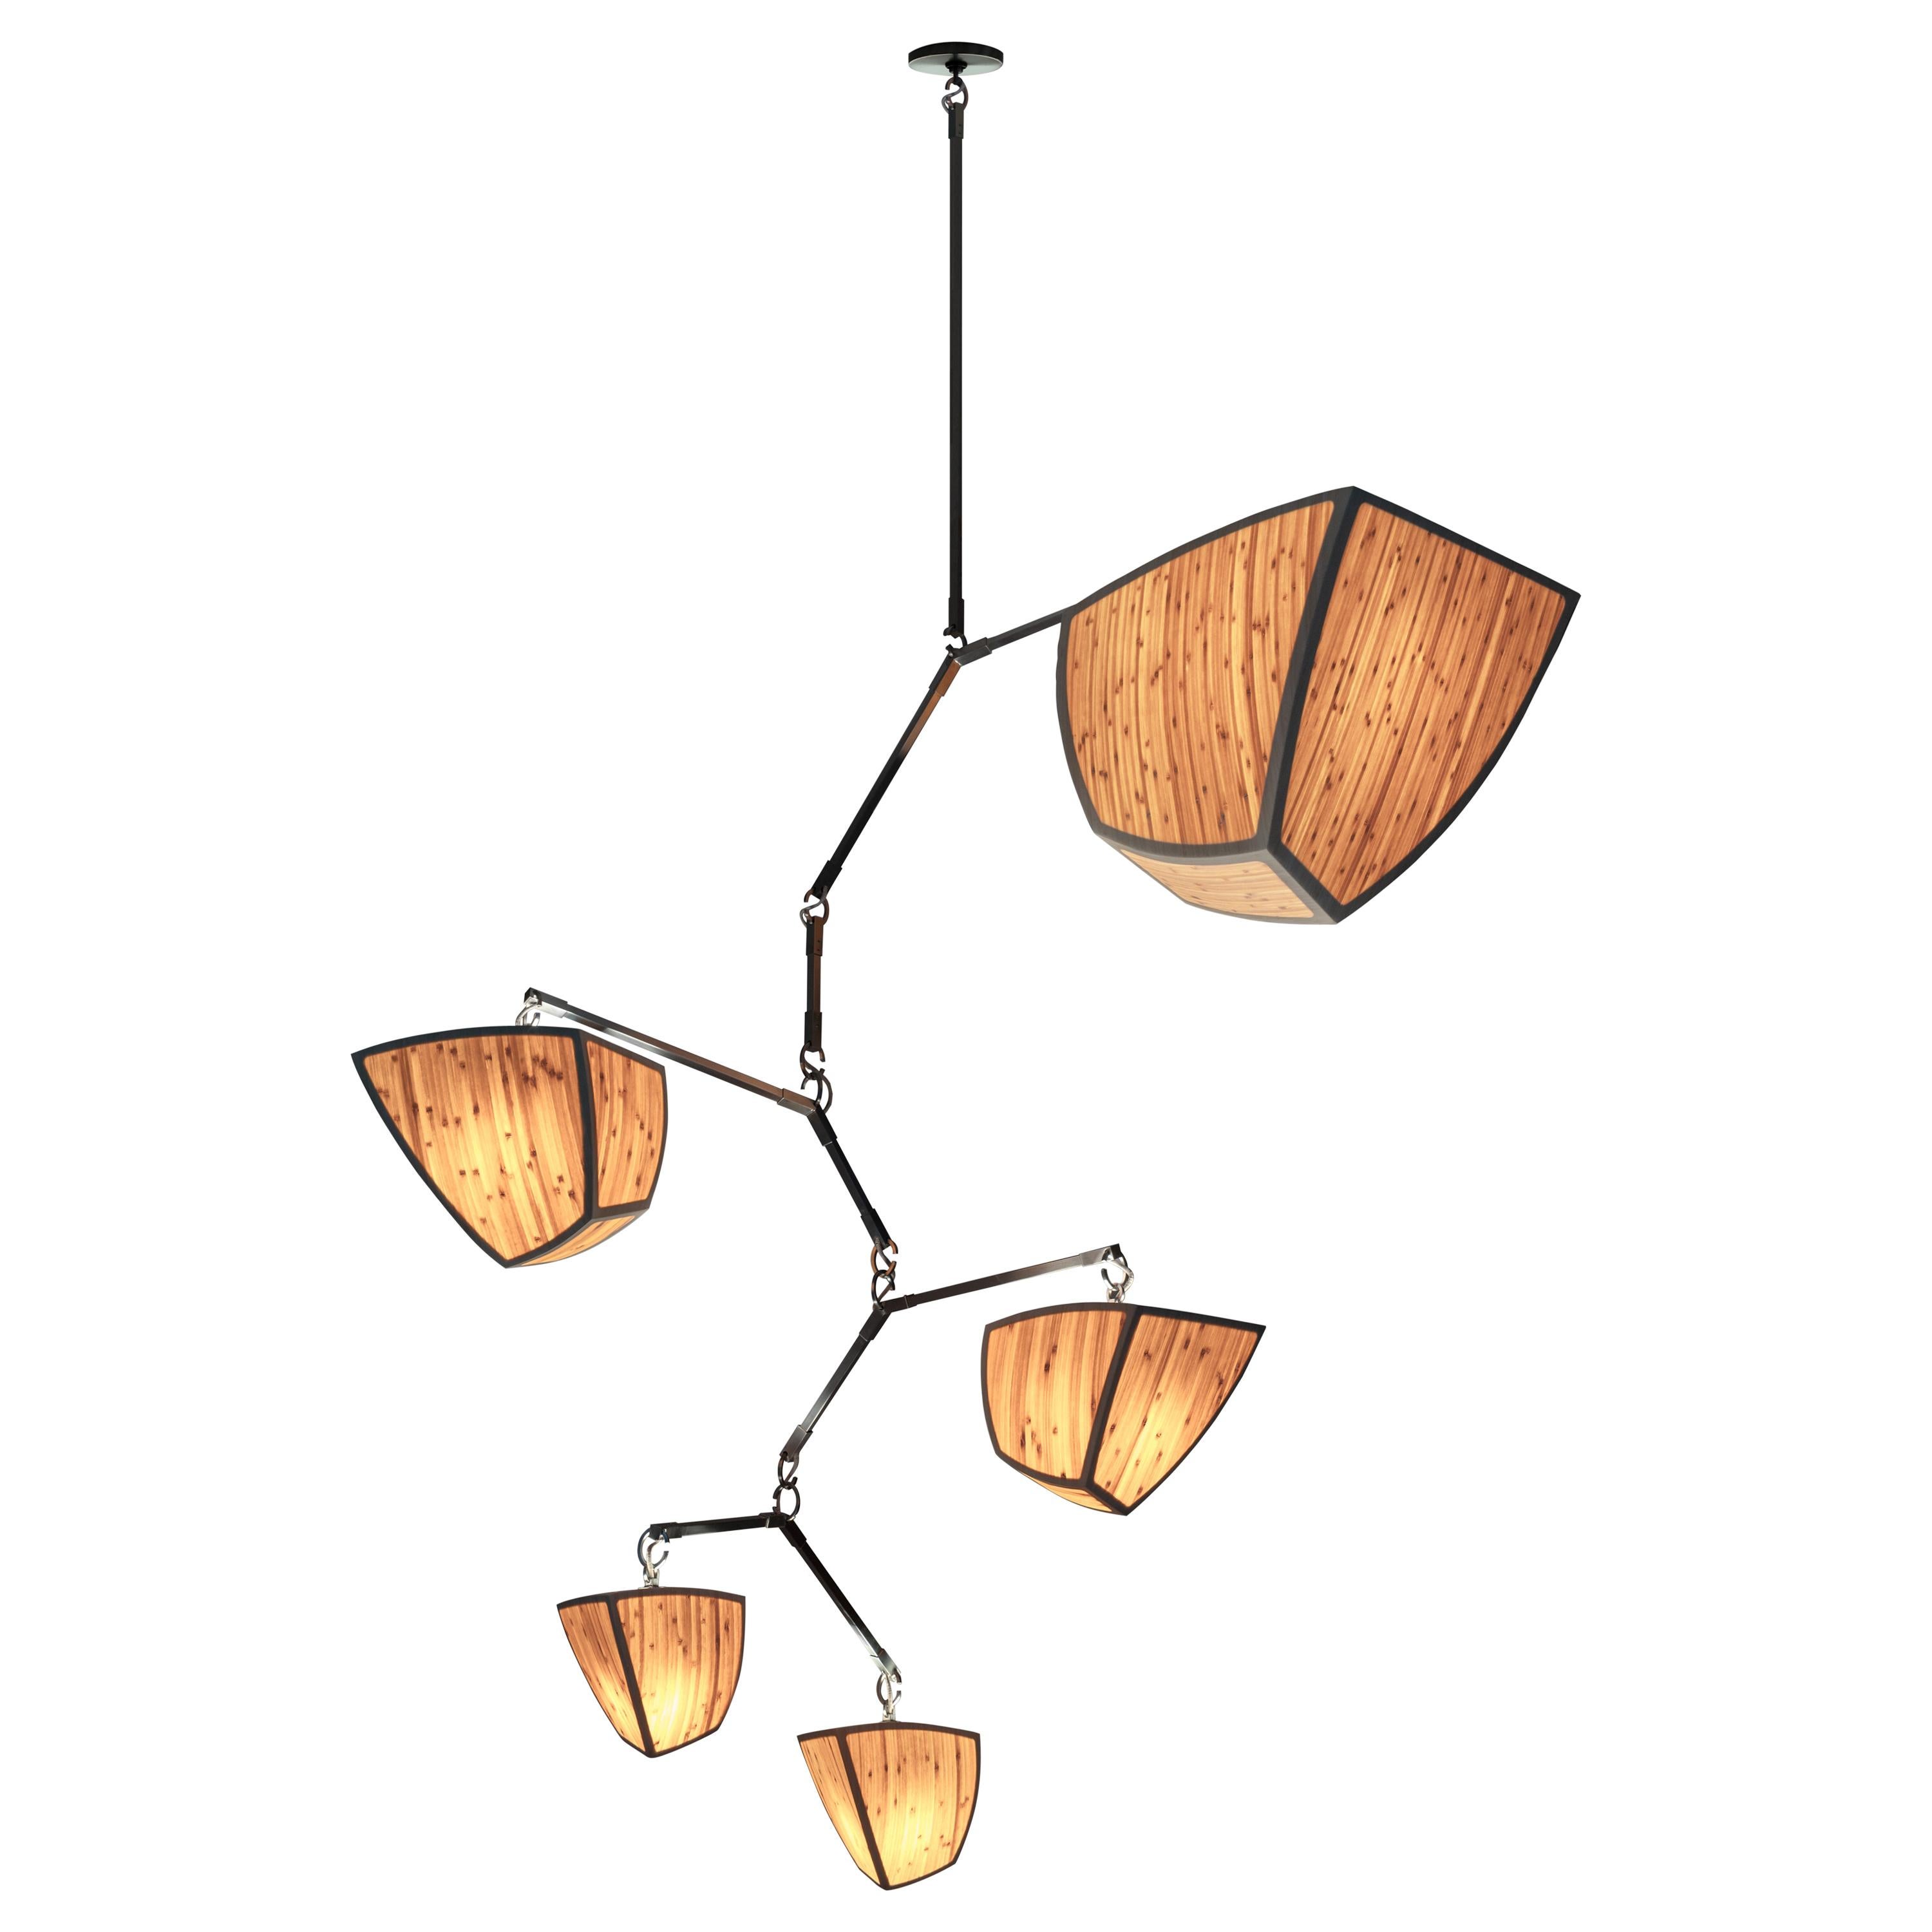 Bamboo Ivy 5 V1: ABCDF Mobile Chandelier, handmade by Andrea Claire Studio